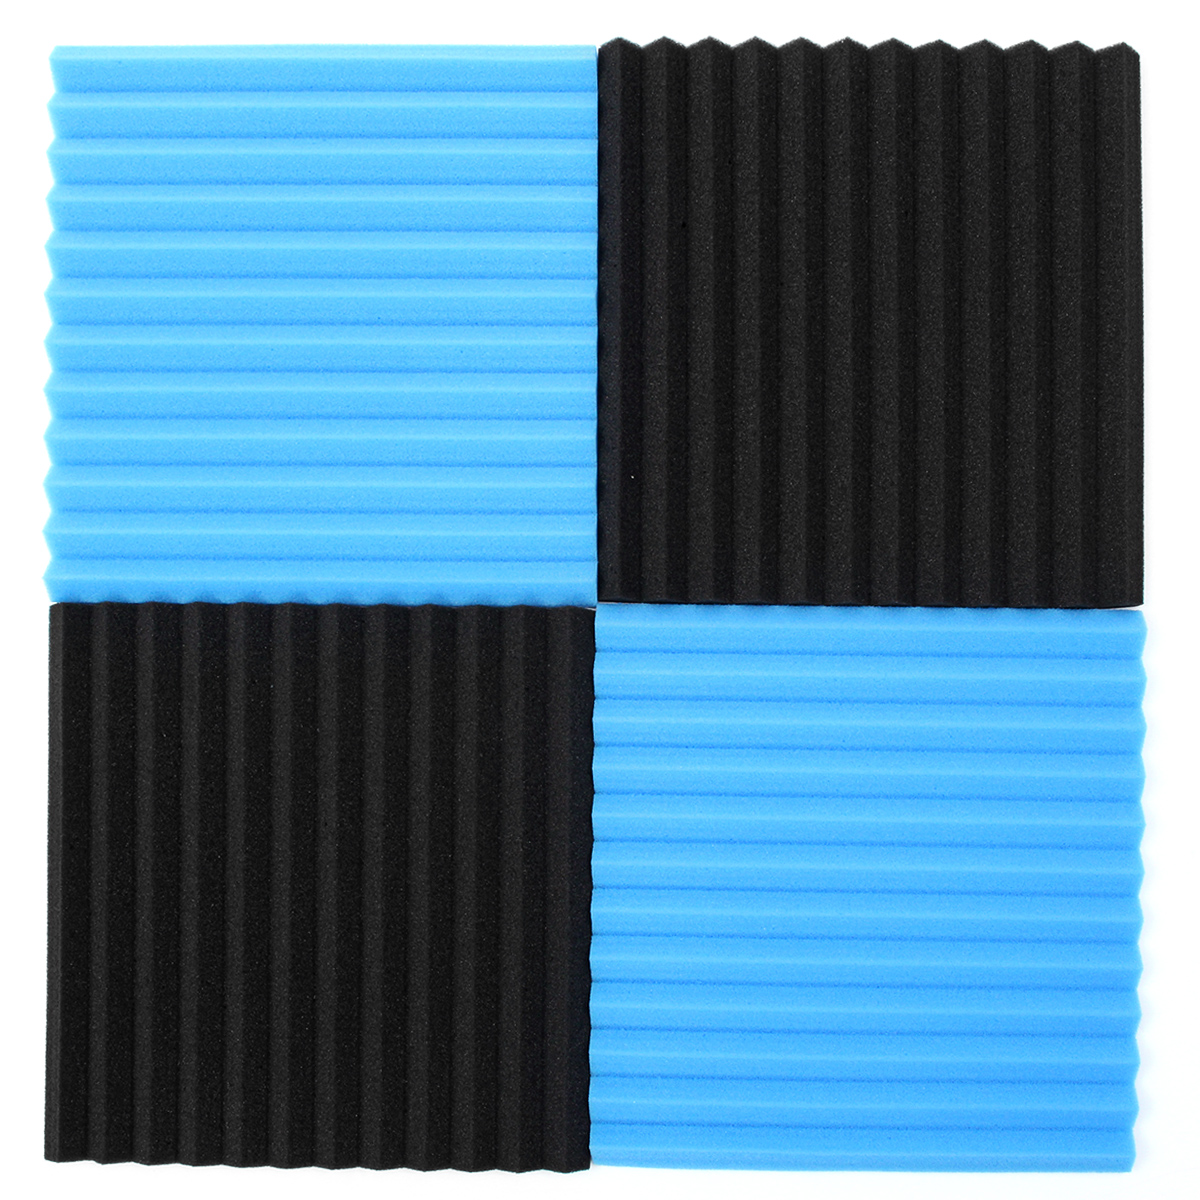 Find 12PCS Soundproofing Foam Tiles Kits Black Blue for Sale on Gipsybee.com with cryptocurrencies